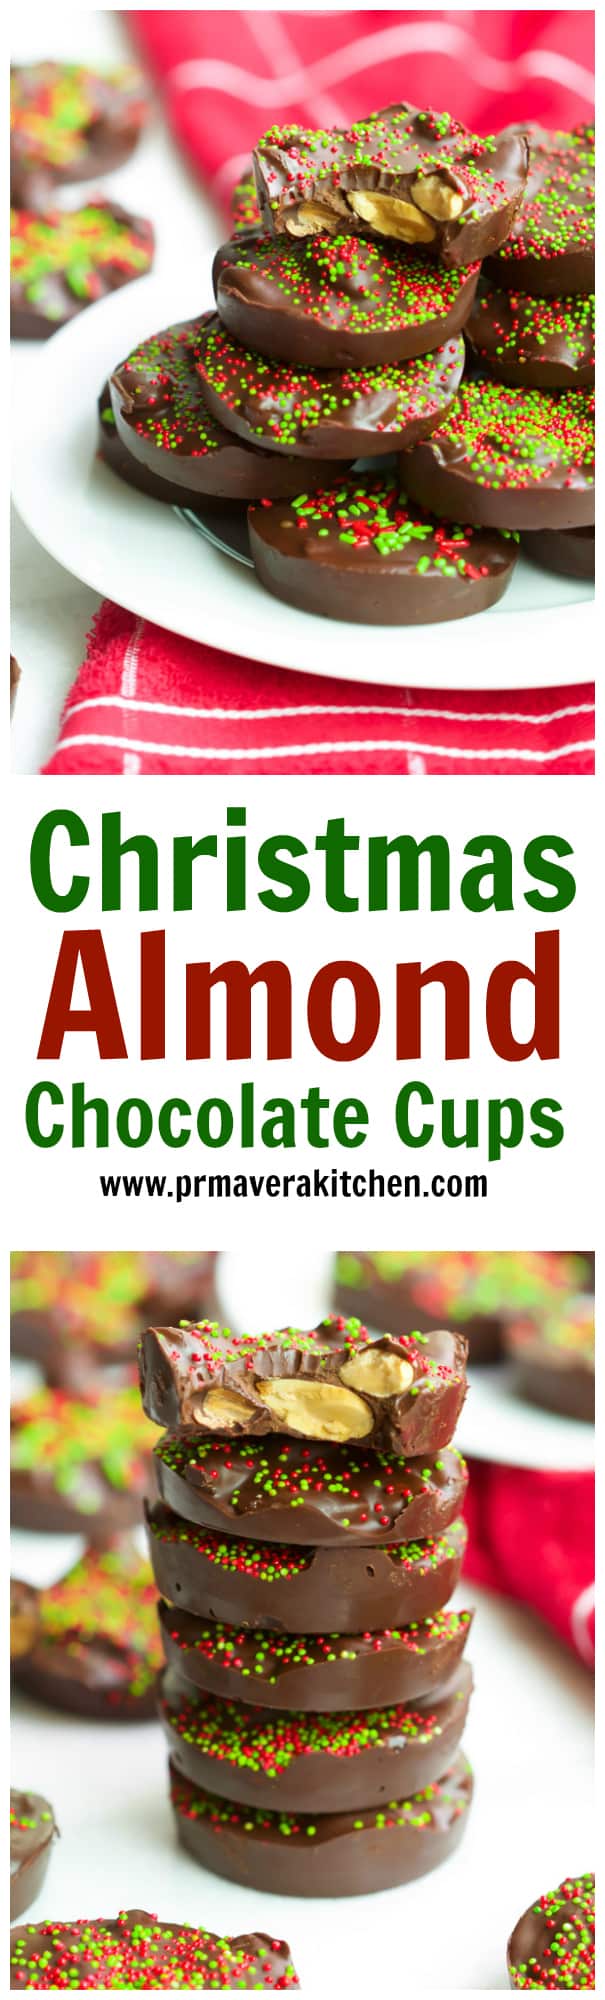 christmas-almond-chocolate-cups - These Christmas Almond Chocolate Cups are made with only 3-Ingredients and they require no baking. It's ultra-easy to make, delicious, gluten-free and vegan too! 